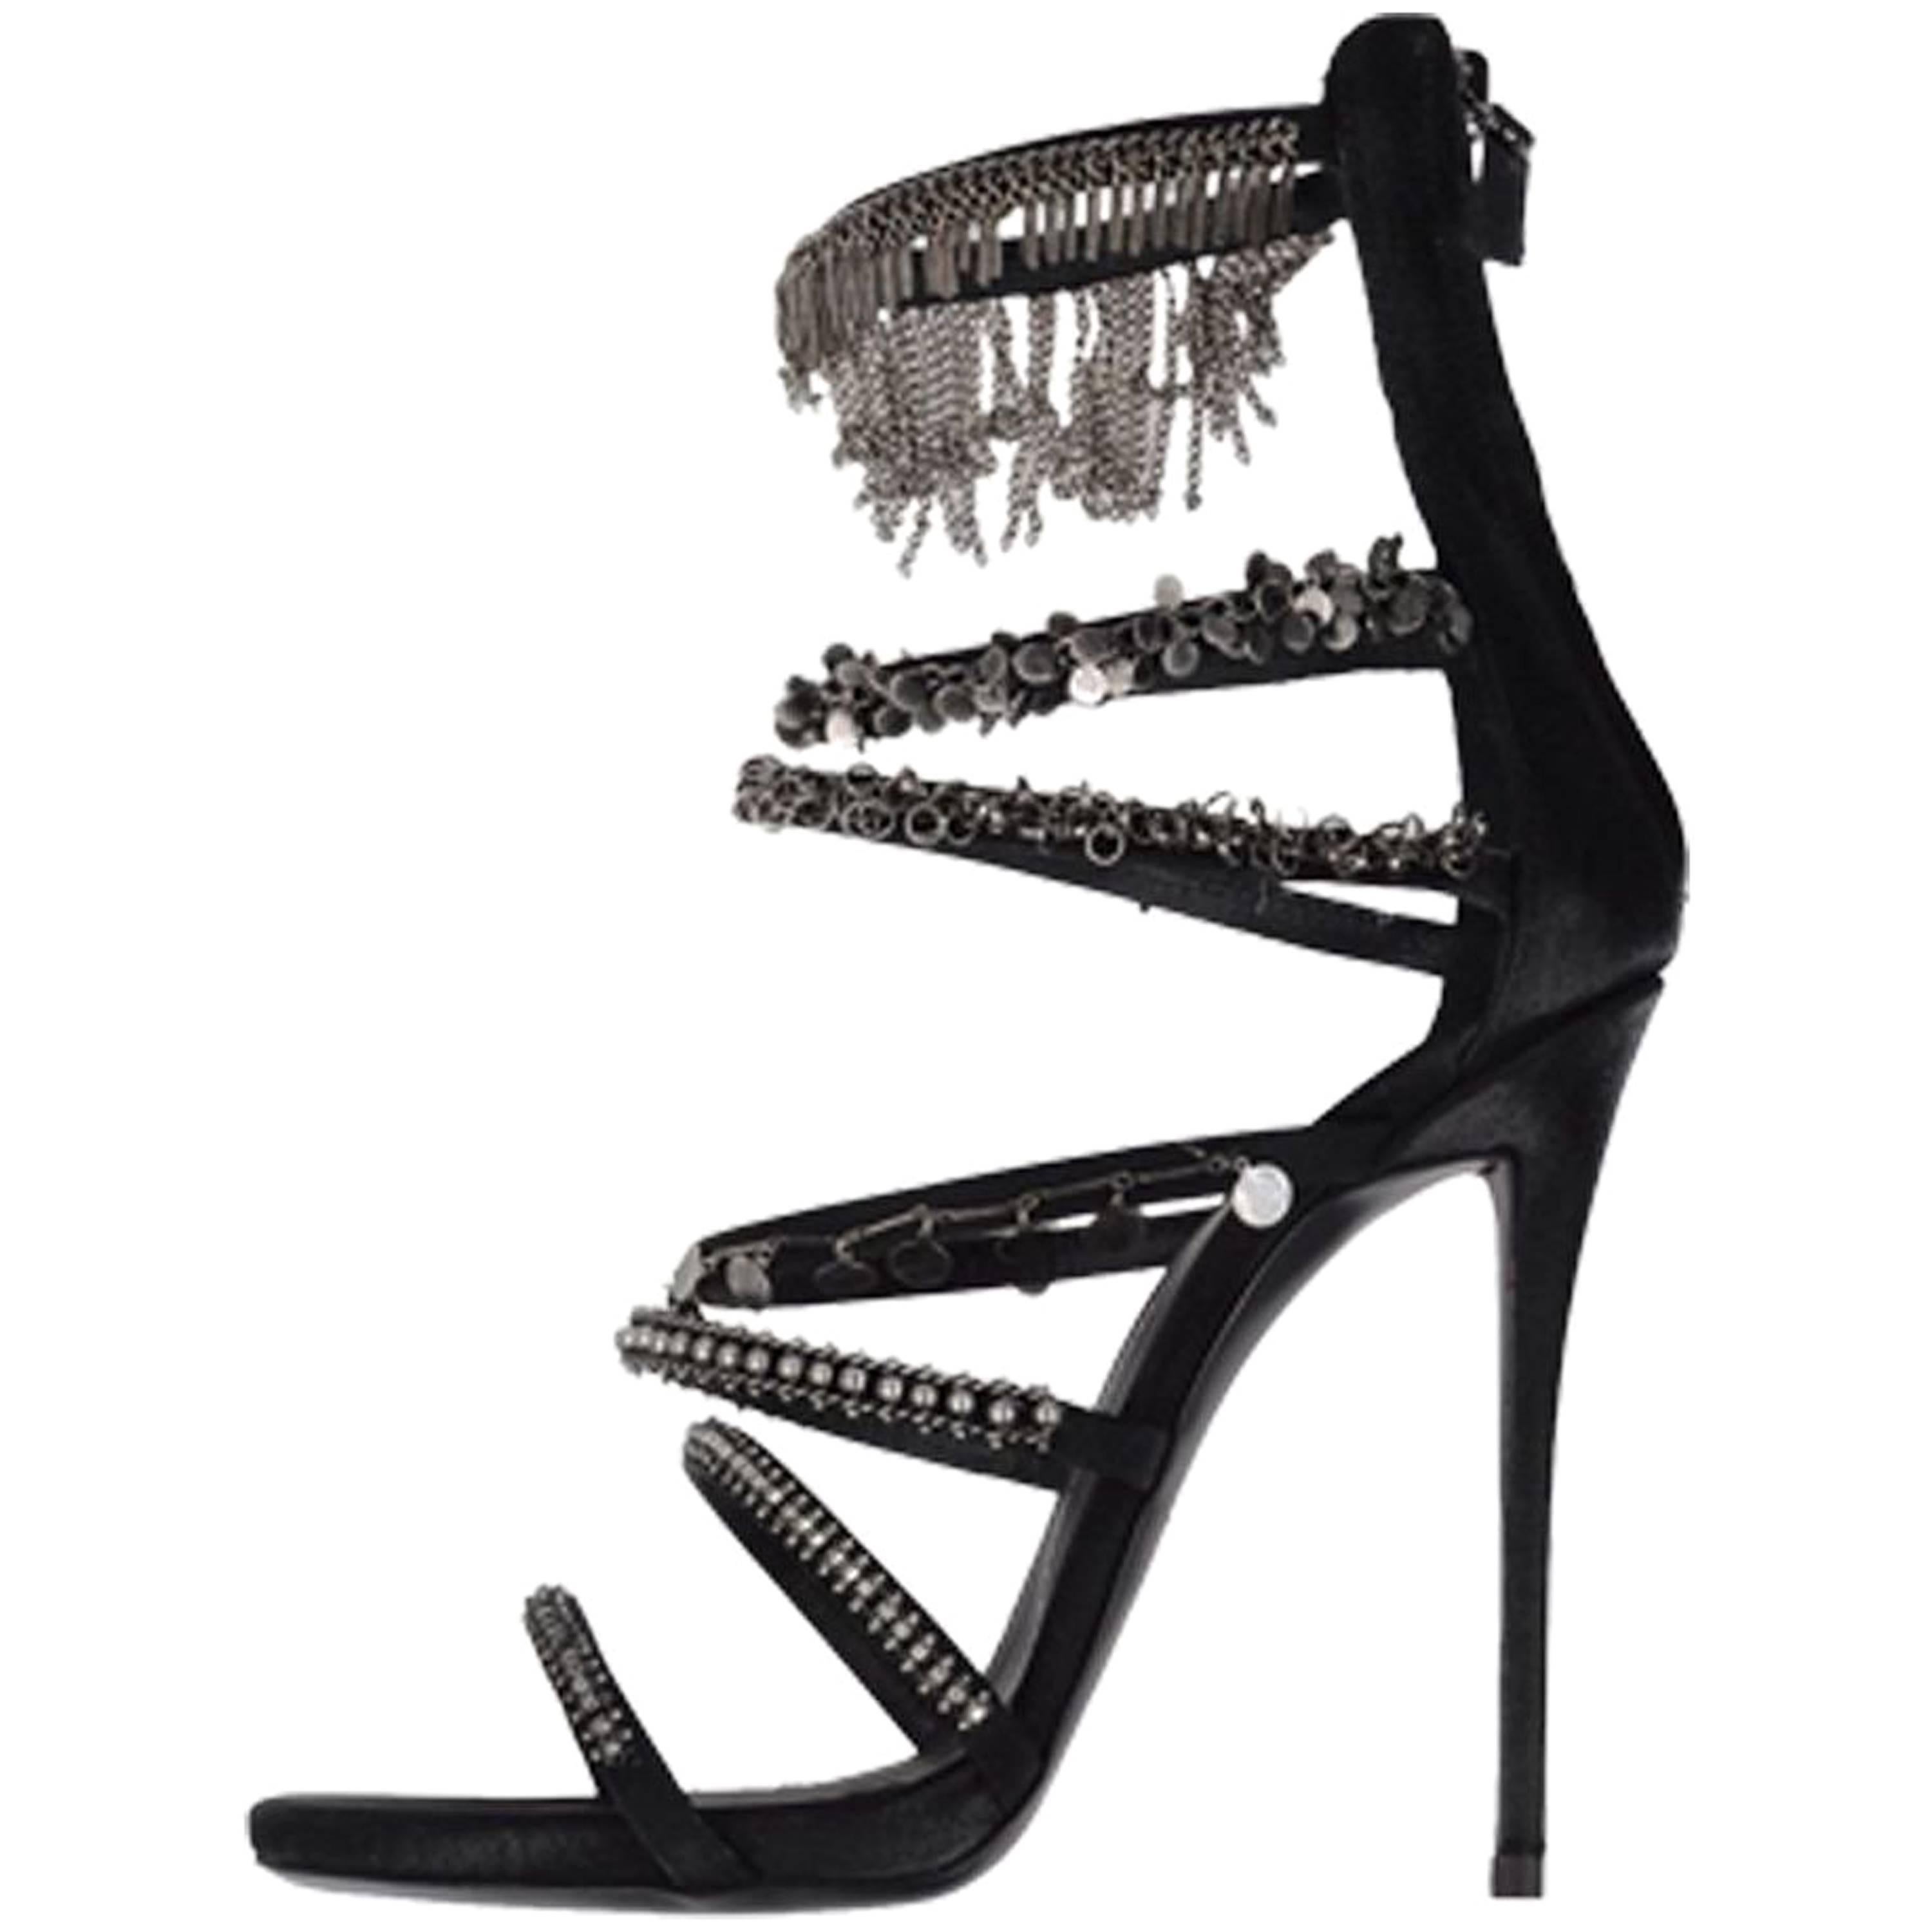 Giuseppe Zanotti New Sold Out Black Suede Silver Coin Chain Heels Sandals in Box